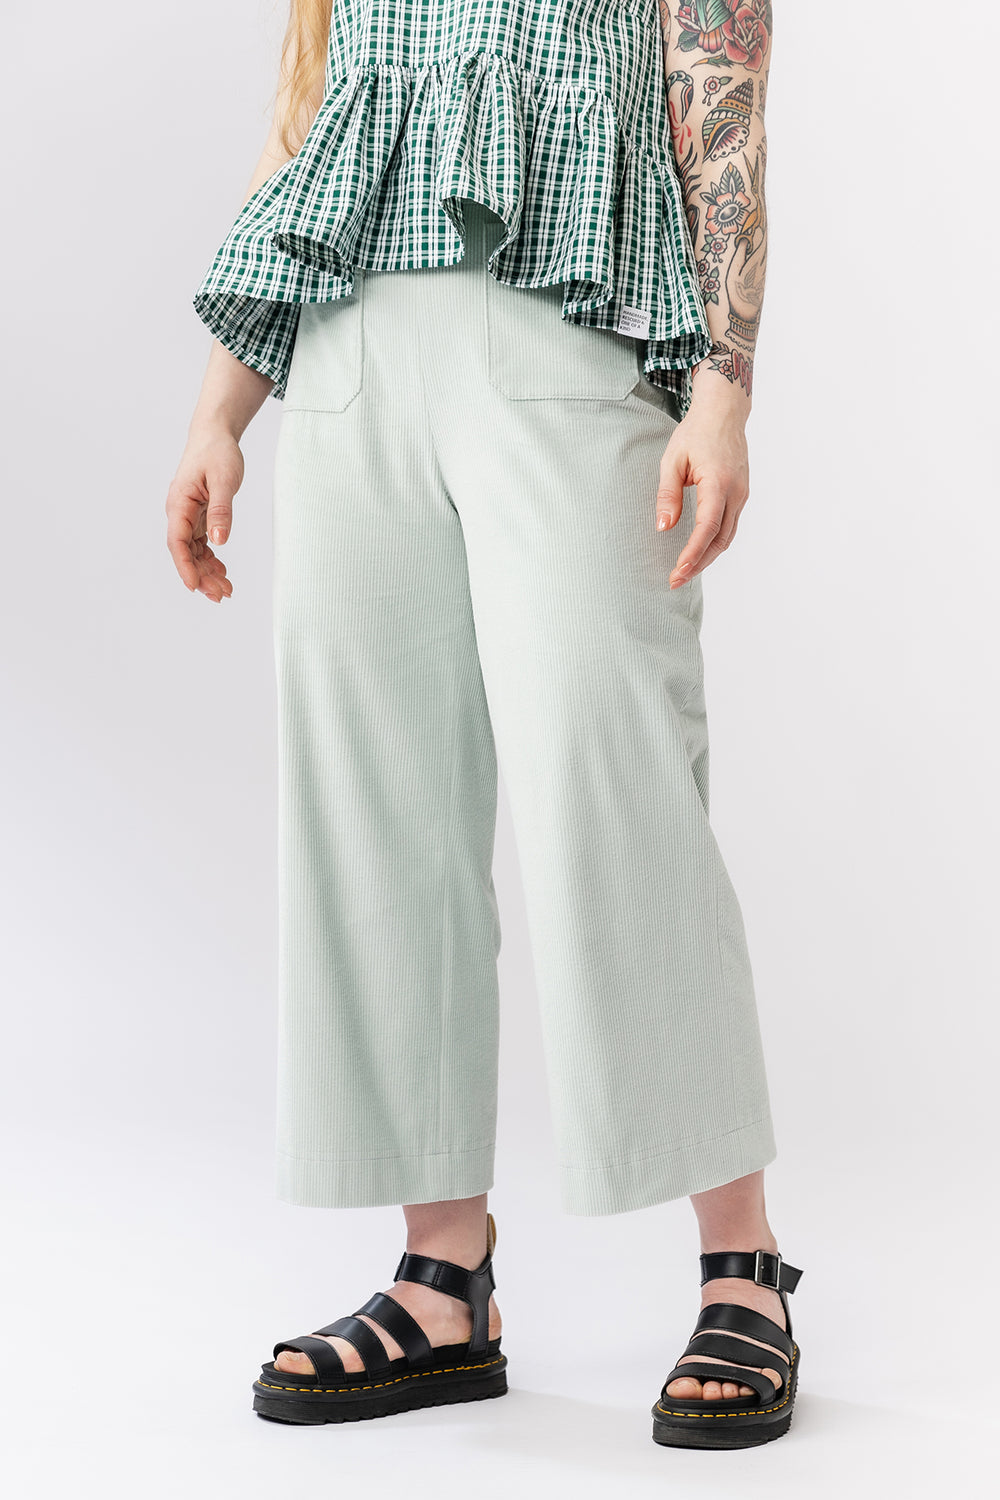 Woman wearing the Verso Trousers sewing pattern from Named on The Fold Line. A trousers pattern made in cotton or linen fabric, featuring a high waist, straight leg, invisible zipper, patch pockets, and cropped length.